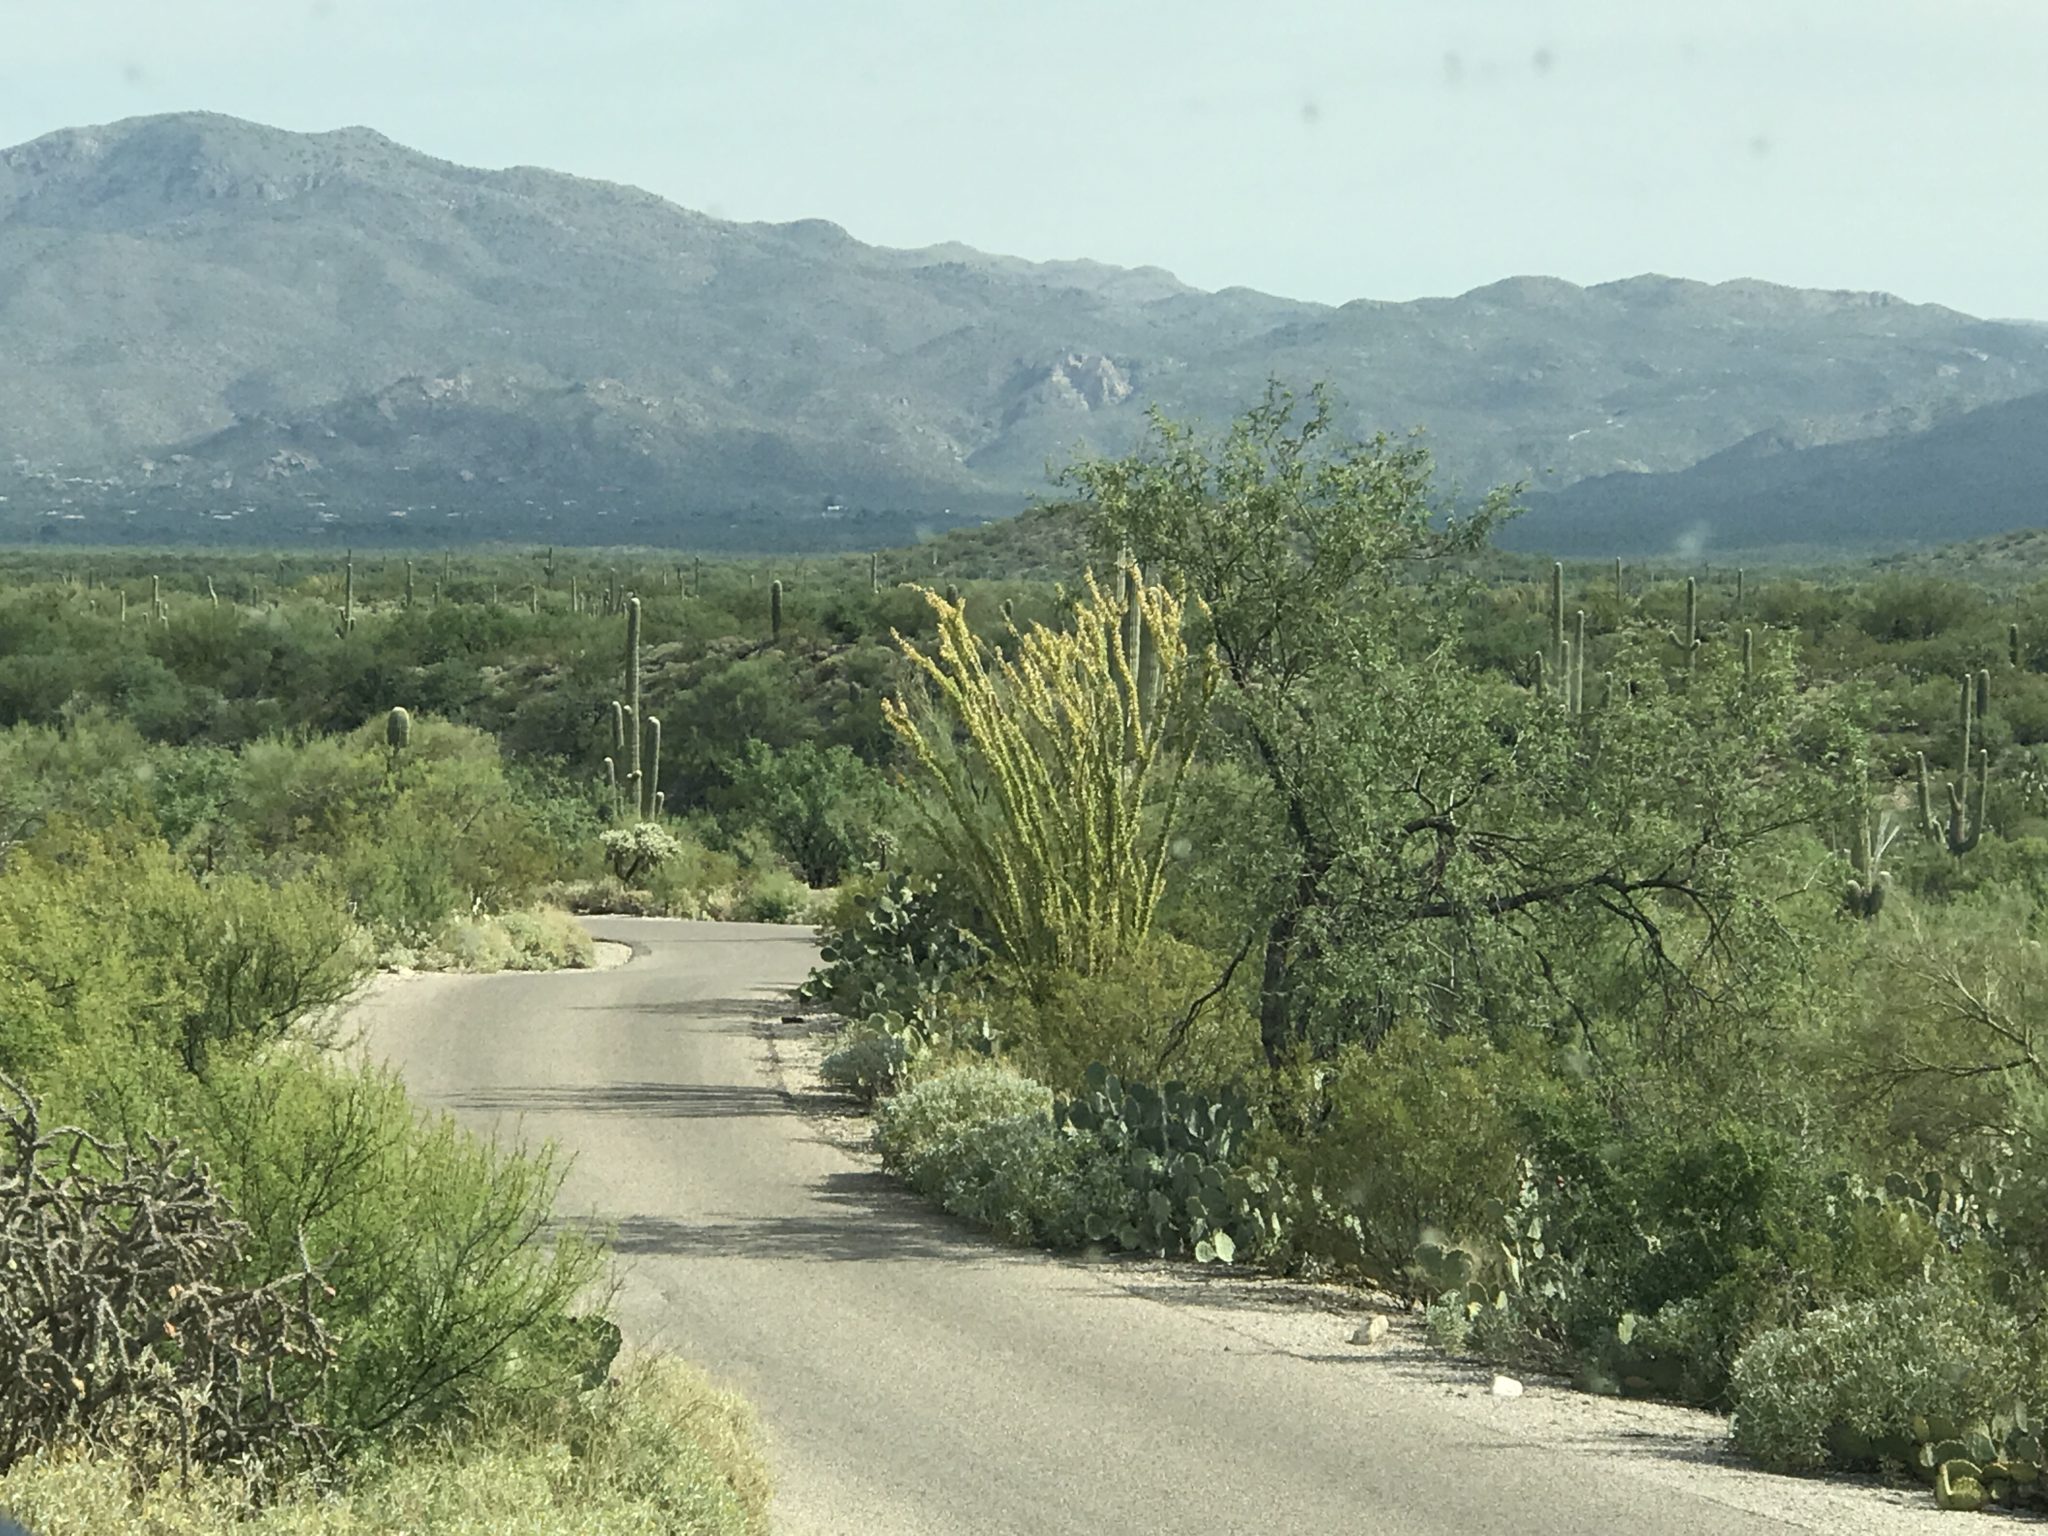 Summer Road Trip Arizona: Travel Tips for Heading North with Your Kids